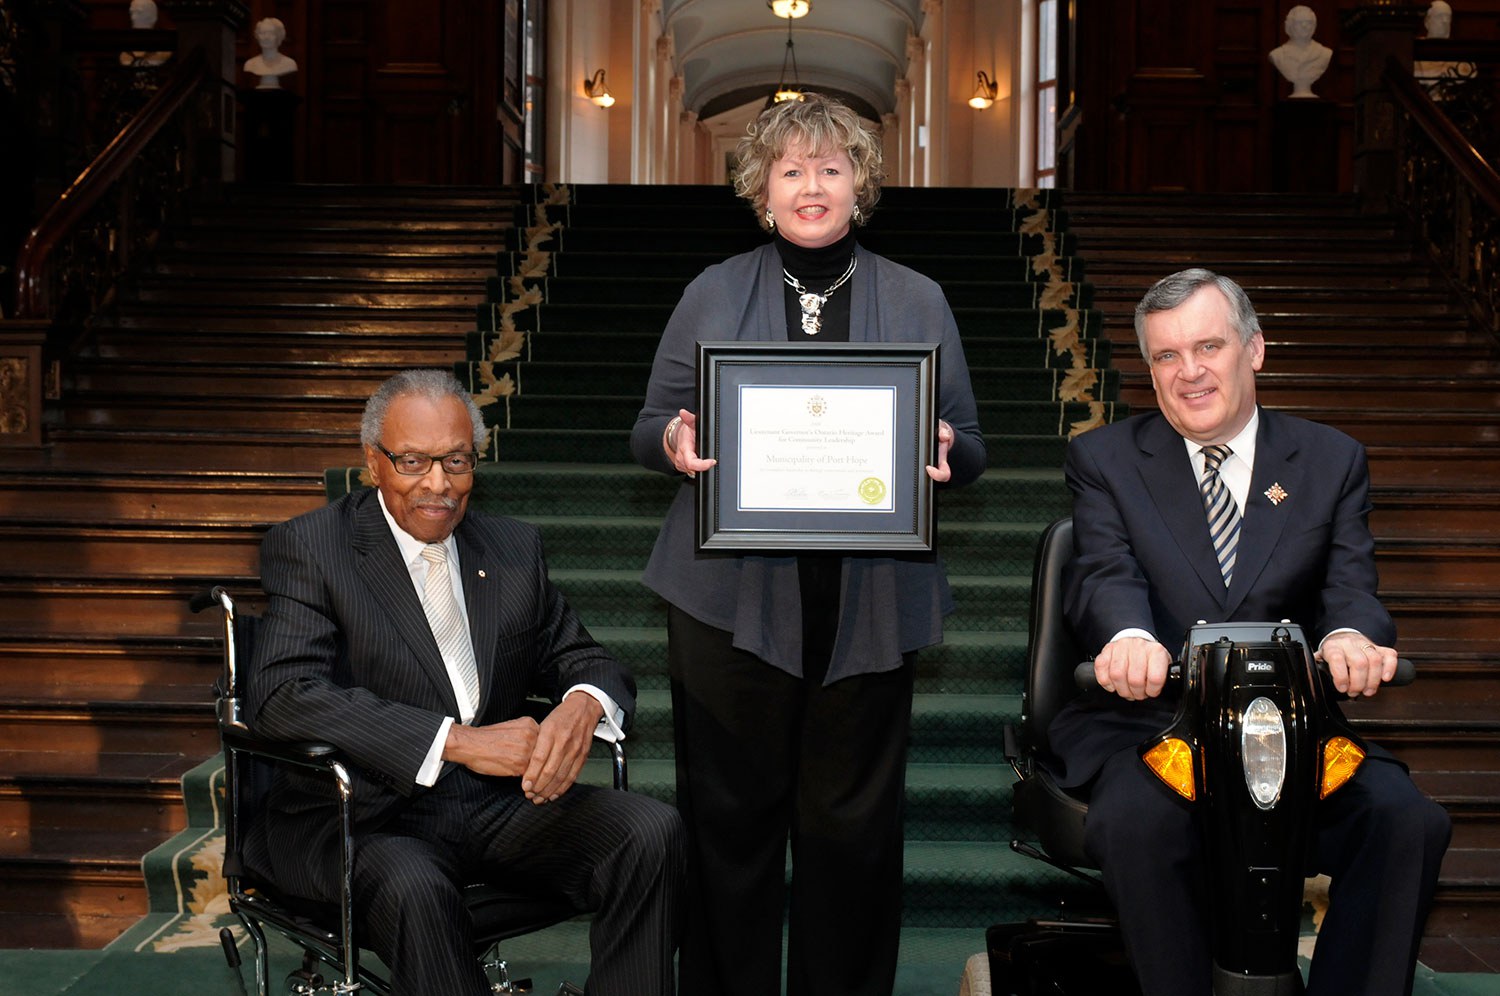 Port Hope was a recipient of a Community Leadership Award in 2008. The award was presented to Councillor Karen O’Hara by Lincoln M. Alexander, former Chairman of the Ontario Heritage Trust, and David C. Onley, Ontario’s Lieutenant Governor. (Photo: Tessa J. Buchan)